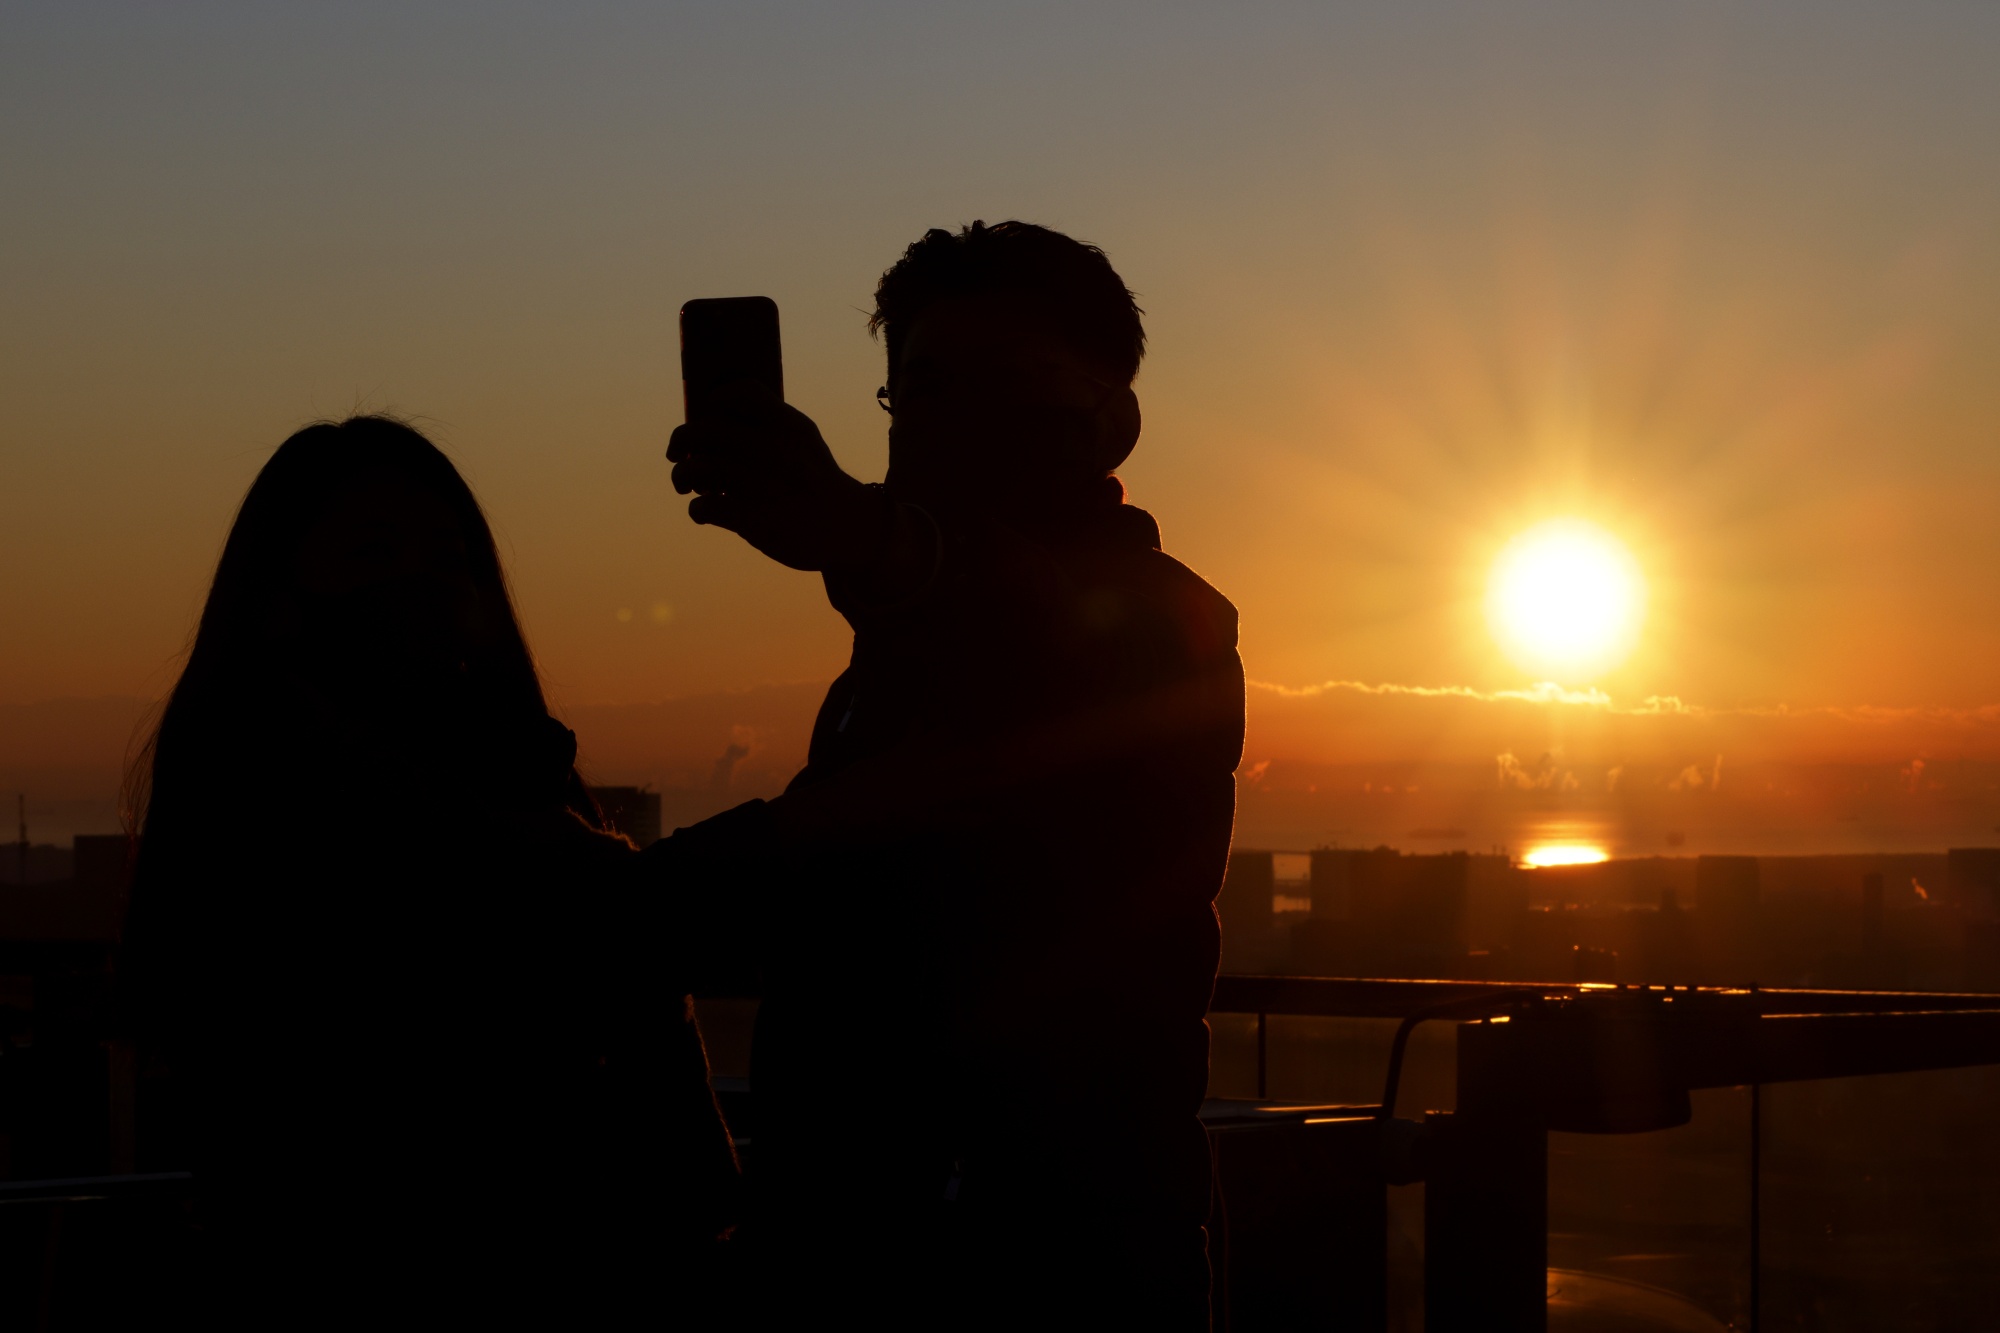 Visitors take a selfie photograph while the sun rises, seen from the Shibuya Sky observation deck at the Shibuya Scramble Square building in Tokyo, Japan, on Sunday, Jan. 1, 2023.